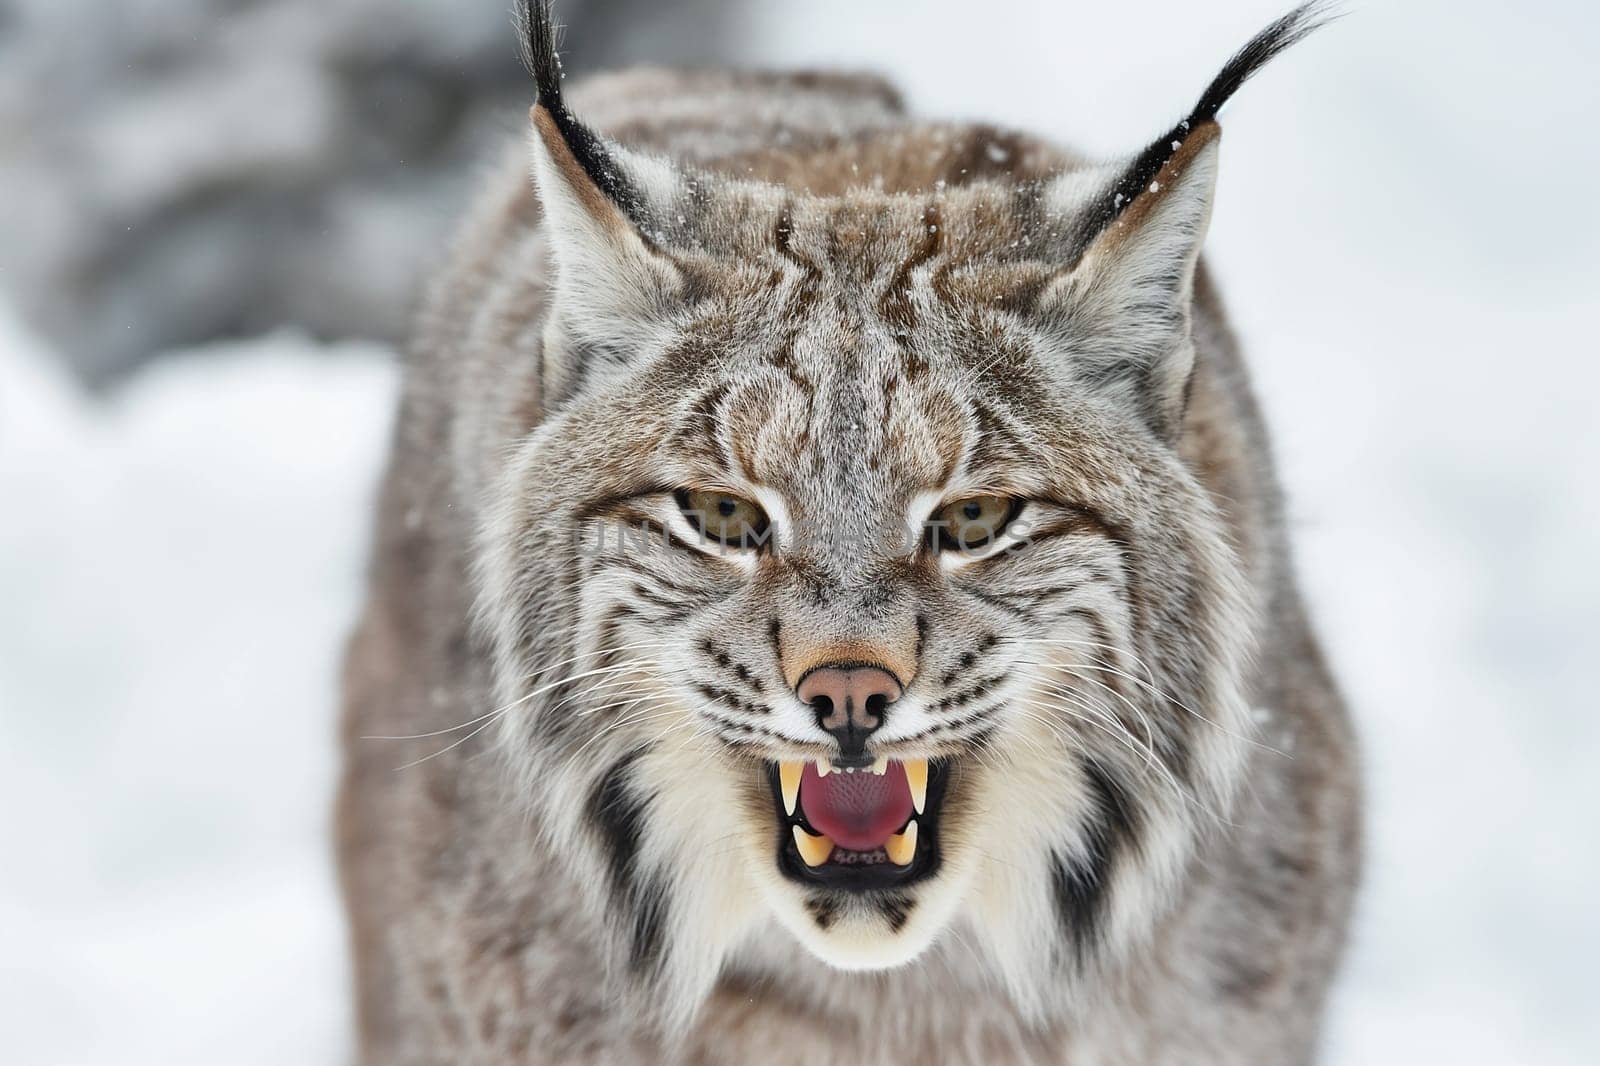 A wild and angry eurasian lynx hunting in nature